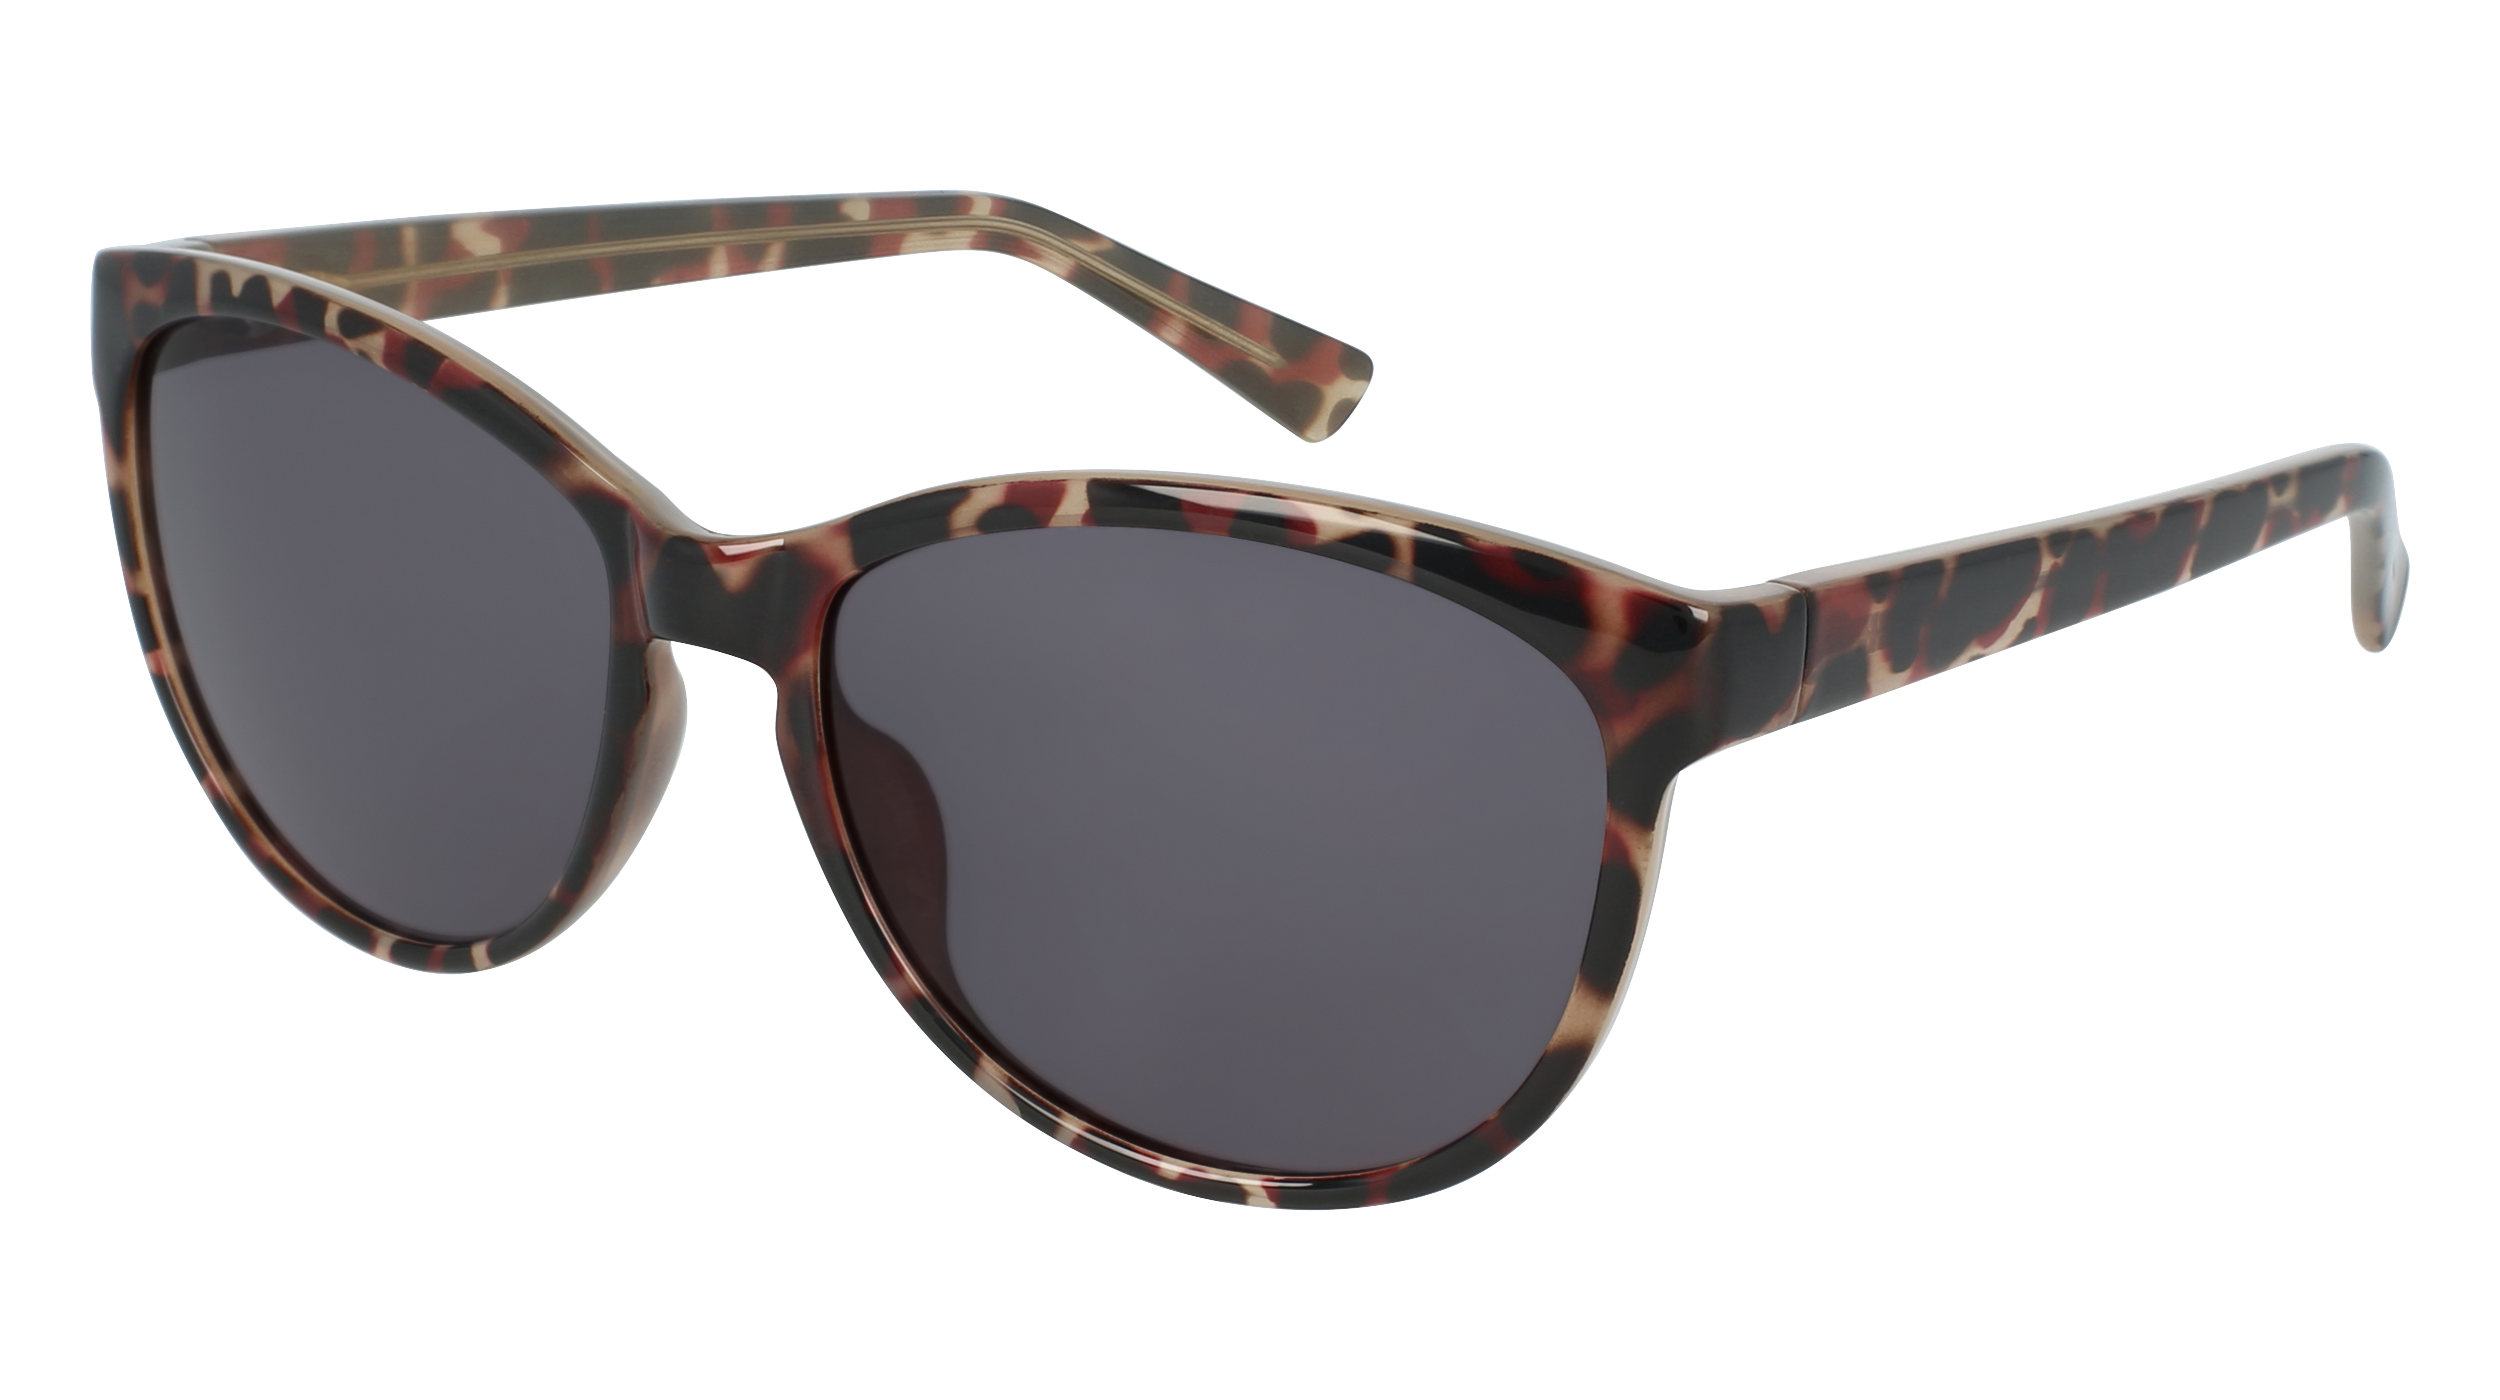 a S 727 women's sunglasses (from the side)